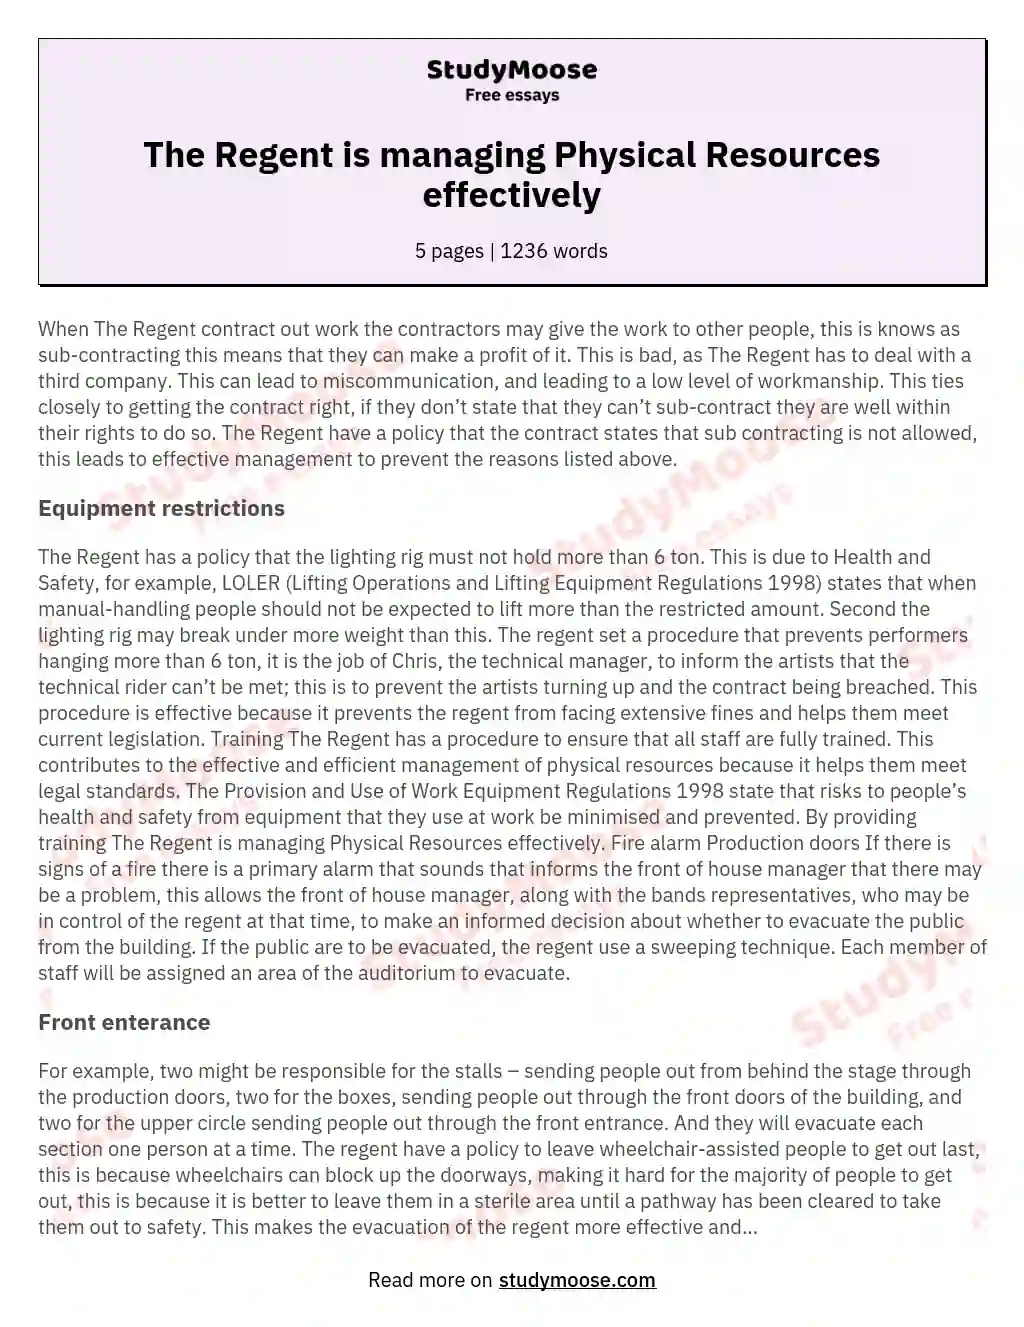 The Regent is managing Physical Resources effectively essay